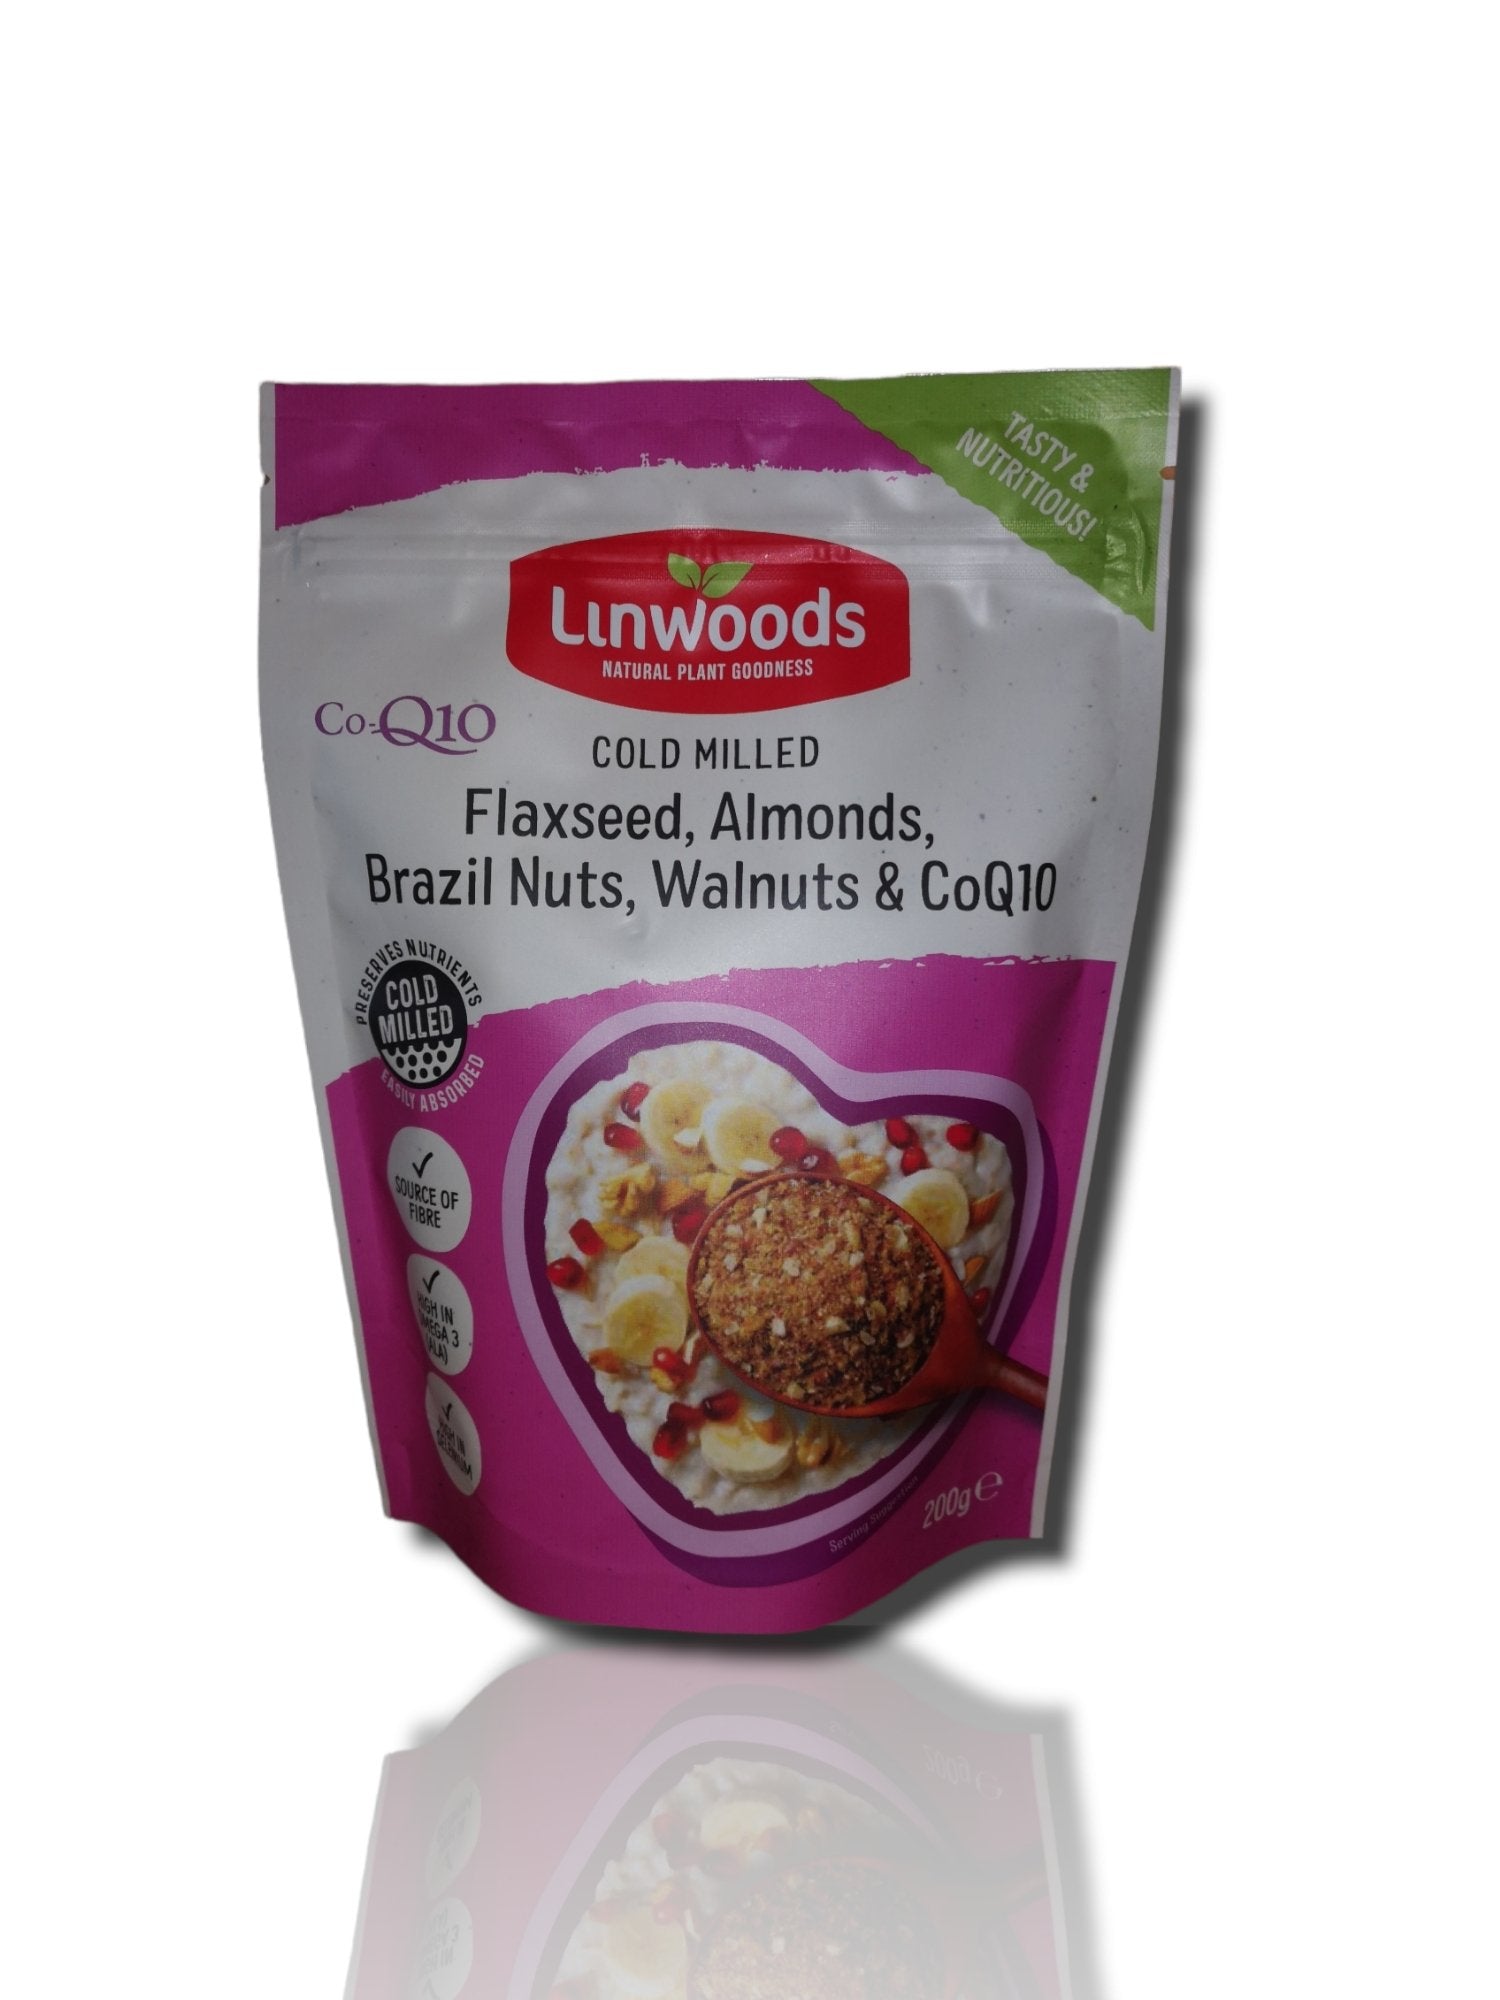 Linwoods Cold Milled Flaxseed mix & CoQ10 - HealthyLiving.ie